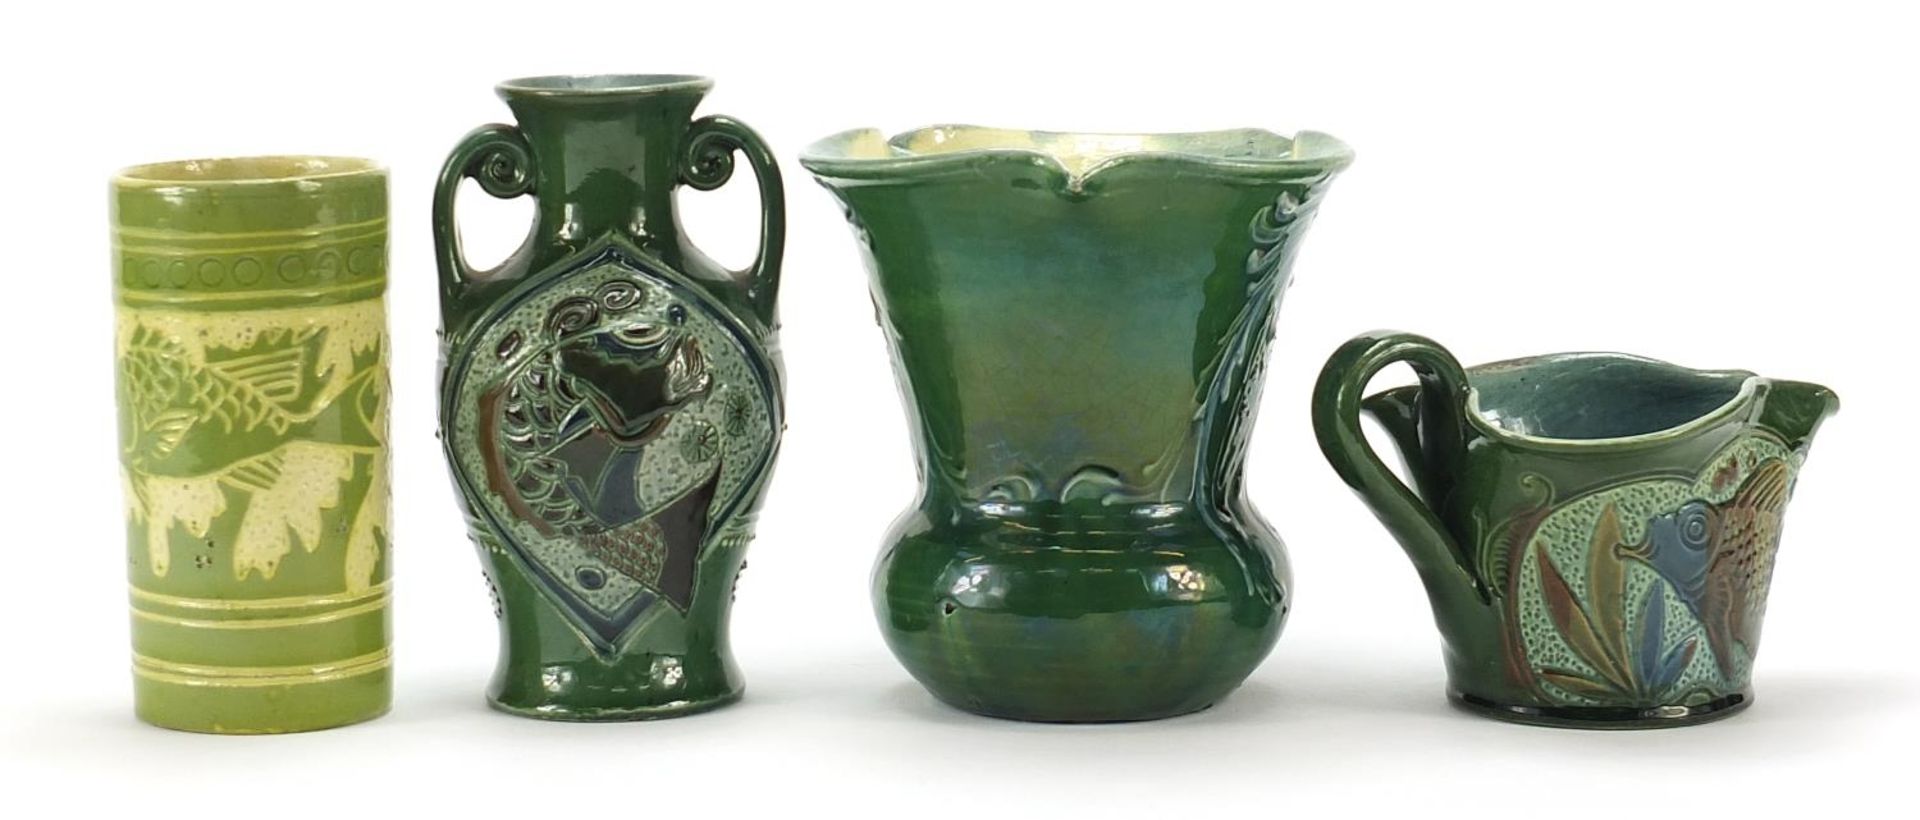 Four pottery vases and jugs including three by Brannam, the largest 15cm high - Image 2 of 4